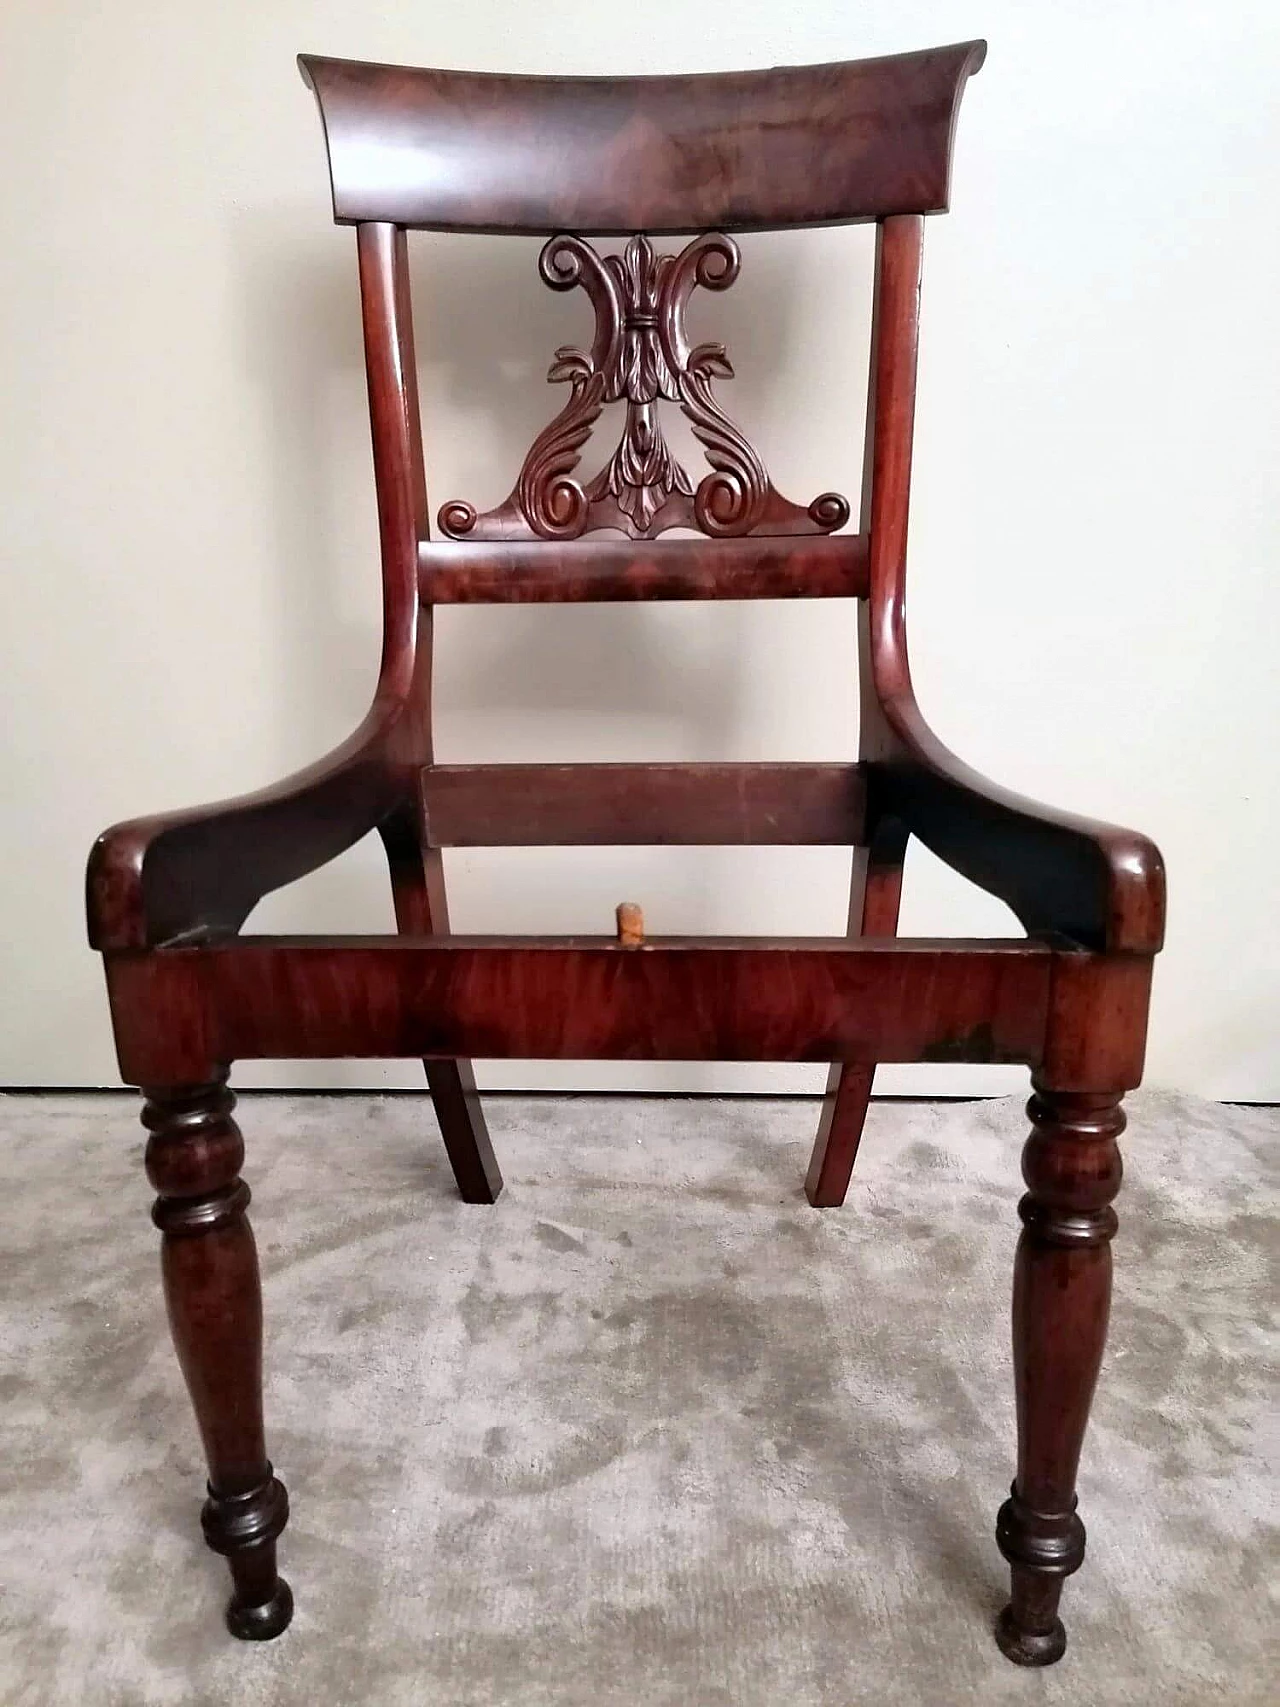 Biedermeier style chair in wood and fabric, 19th century 1466149